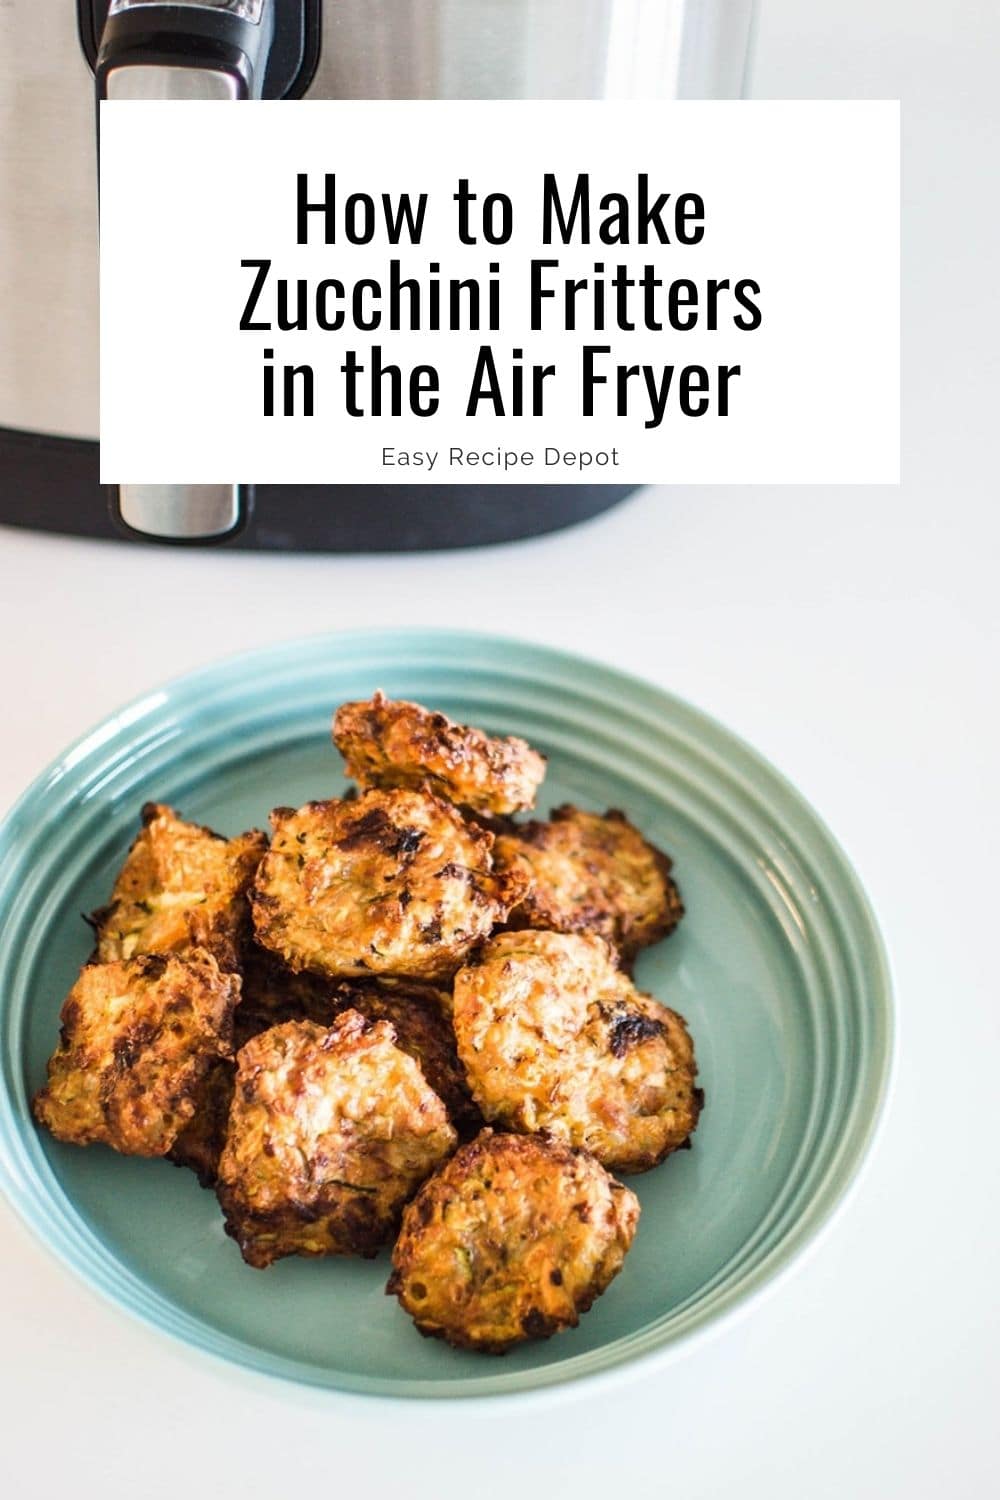 How to make zucchini fritters in the air fryer.